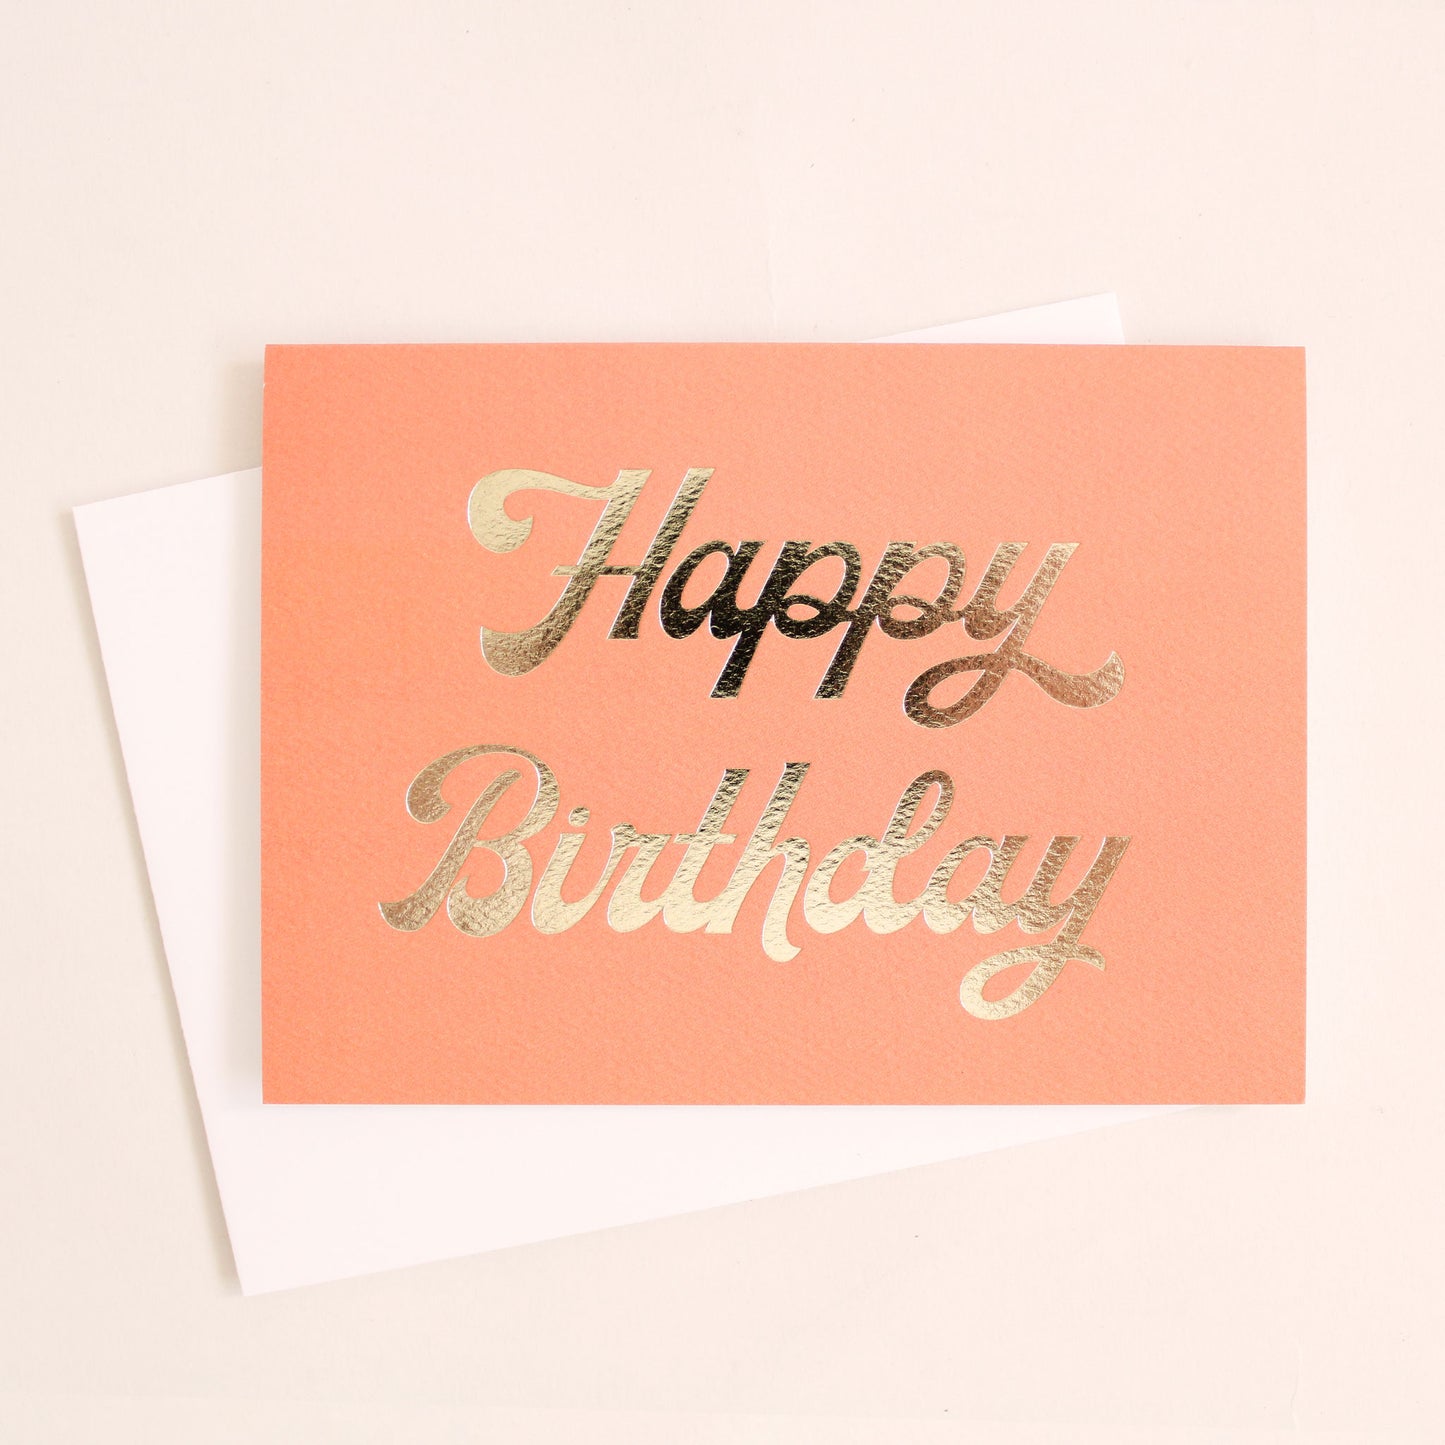 deep peached colored greeting card with gold foil text that reads happy birthday. Card is accompanied by a solid white envelope.